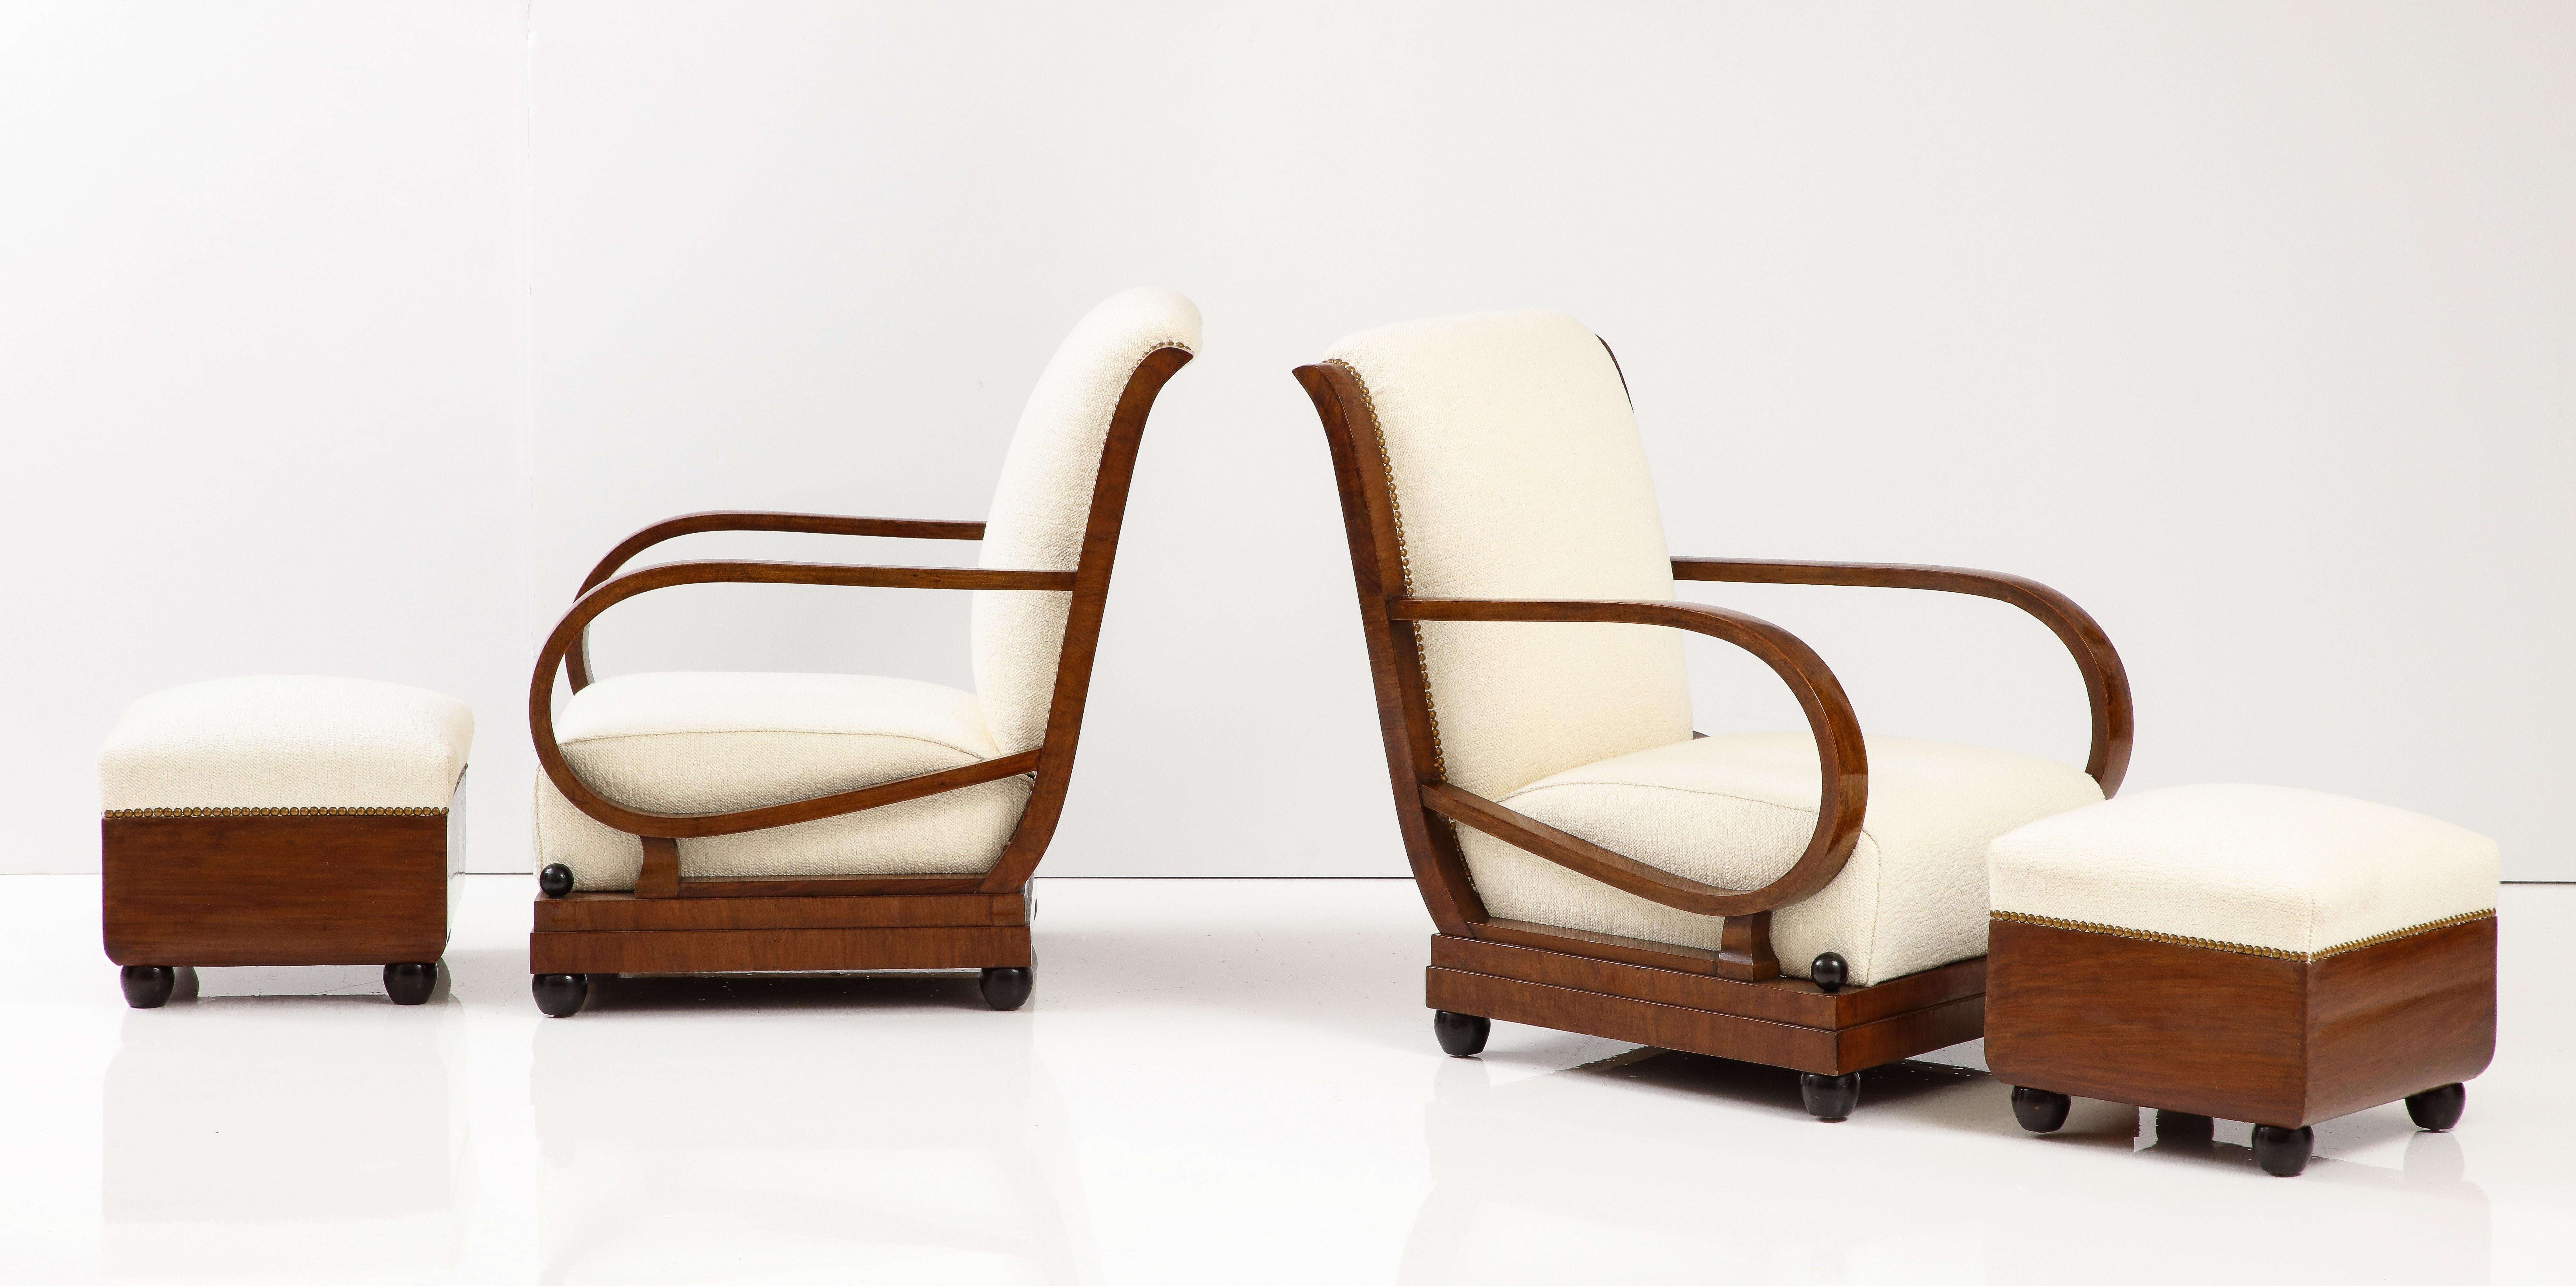 Italian 1920's pair of armchairs / lounge chairs and matching pair of foot stools / ottomans. From the early Art Deco period of Northern Italy, the rich walnut is finely carved and highlights the woods natural beauty, the armchairs backs are